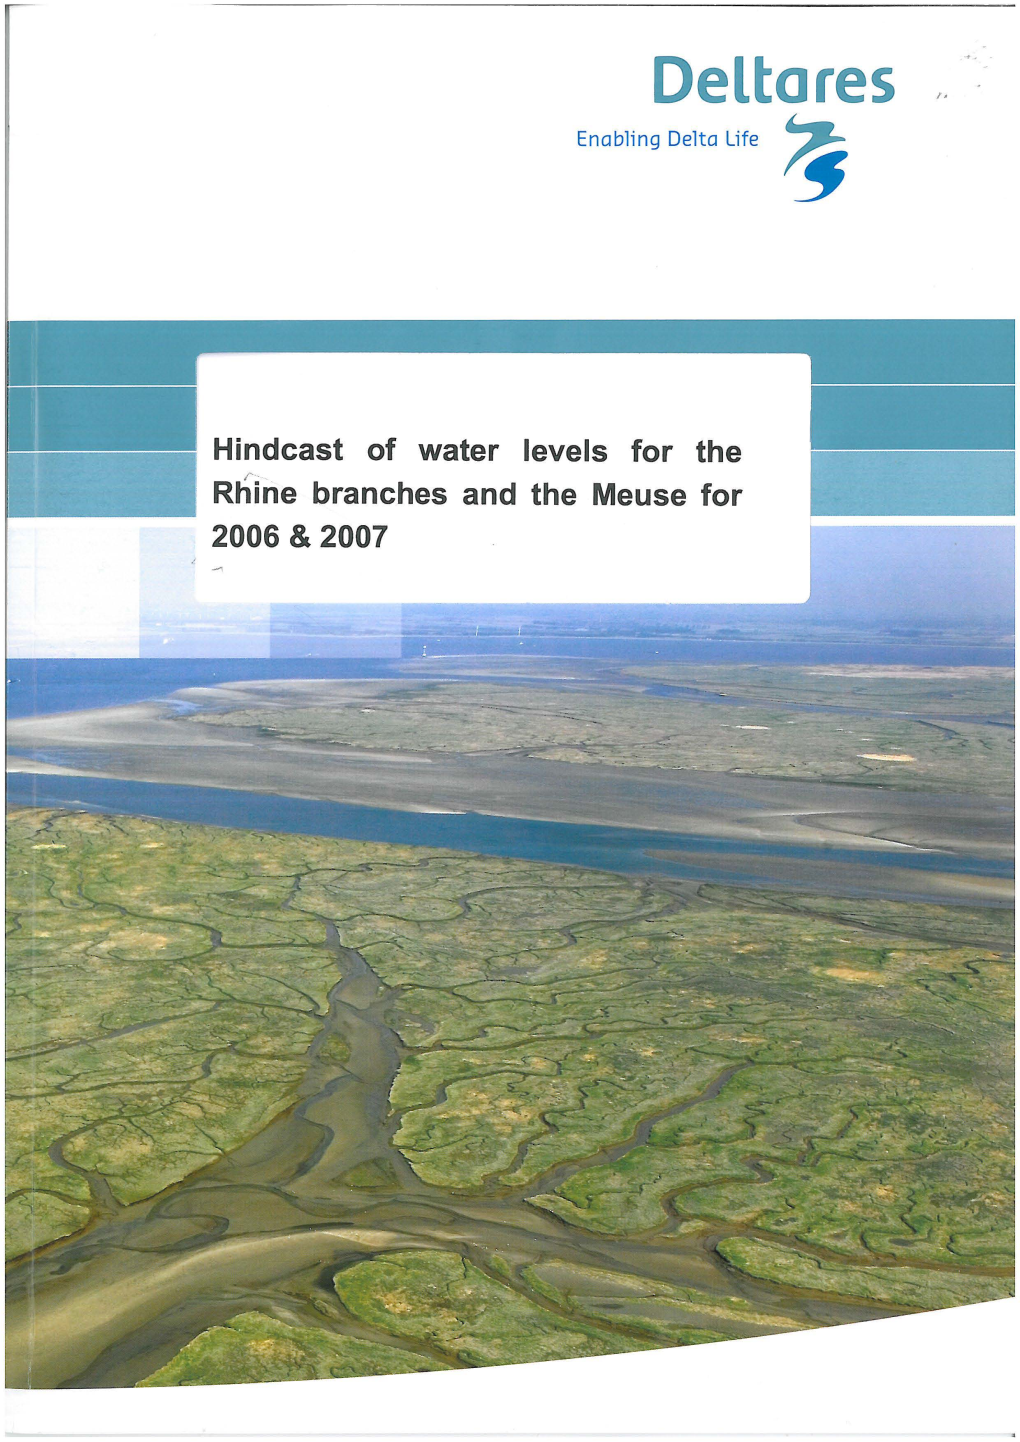 Hindcast of Water Levels for the Rhine Branches and the Meuse for 2006 & 2007